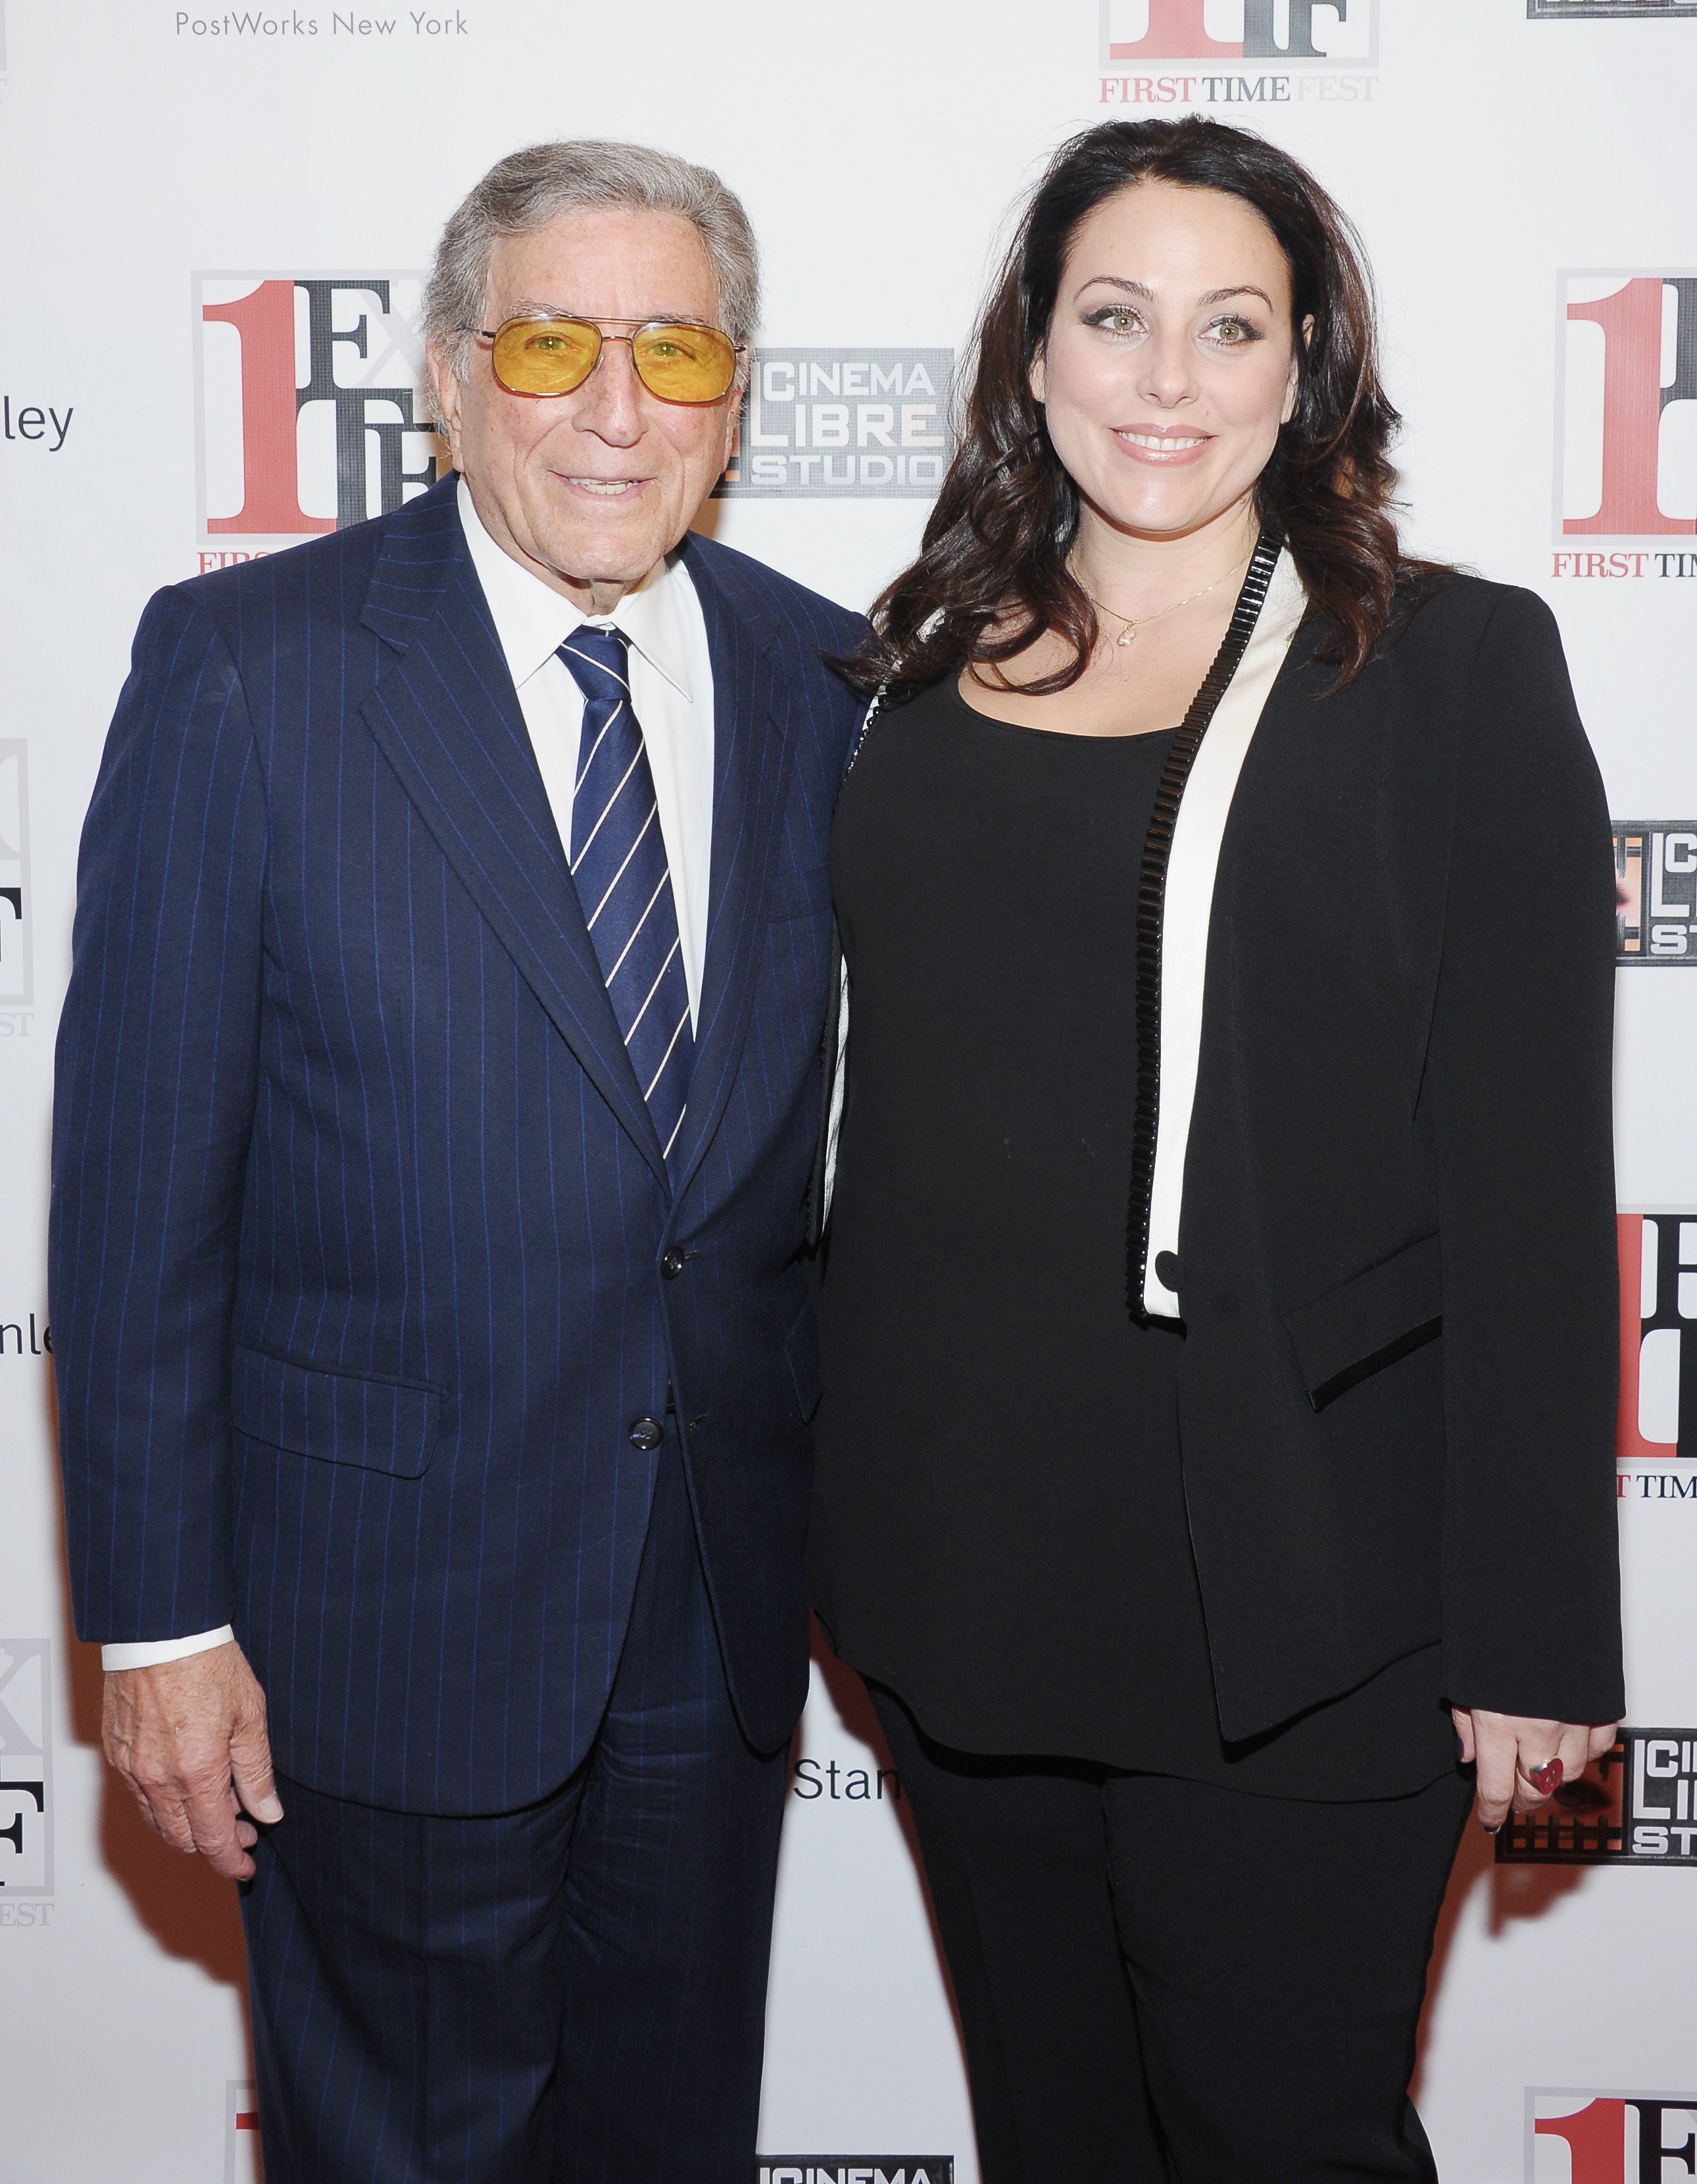 Tony Bennett and daughter Johanna Bennett attend the closing night awards during the 2013 First Time Fest at The Players Club on March 4, 2013, in New York City. | Source: Getty Images